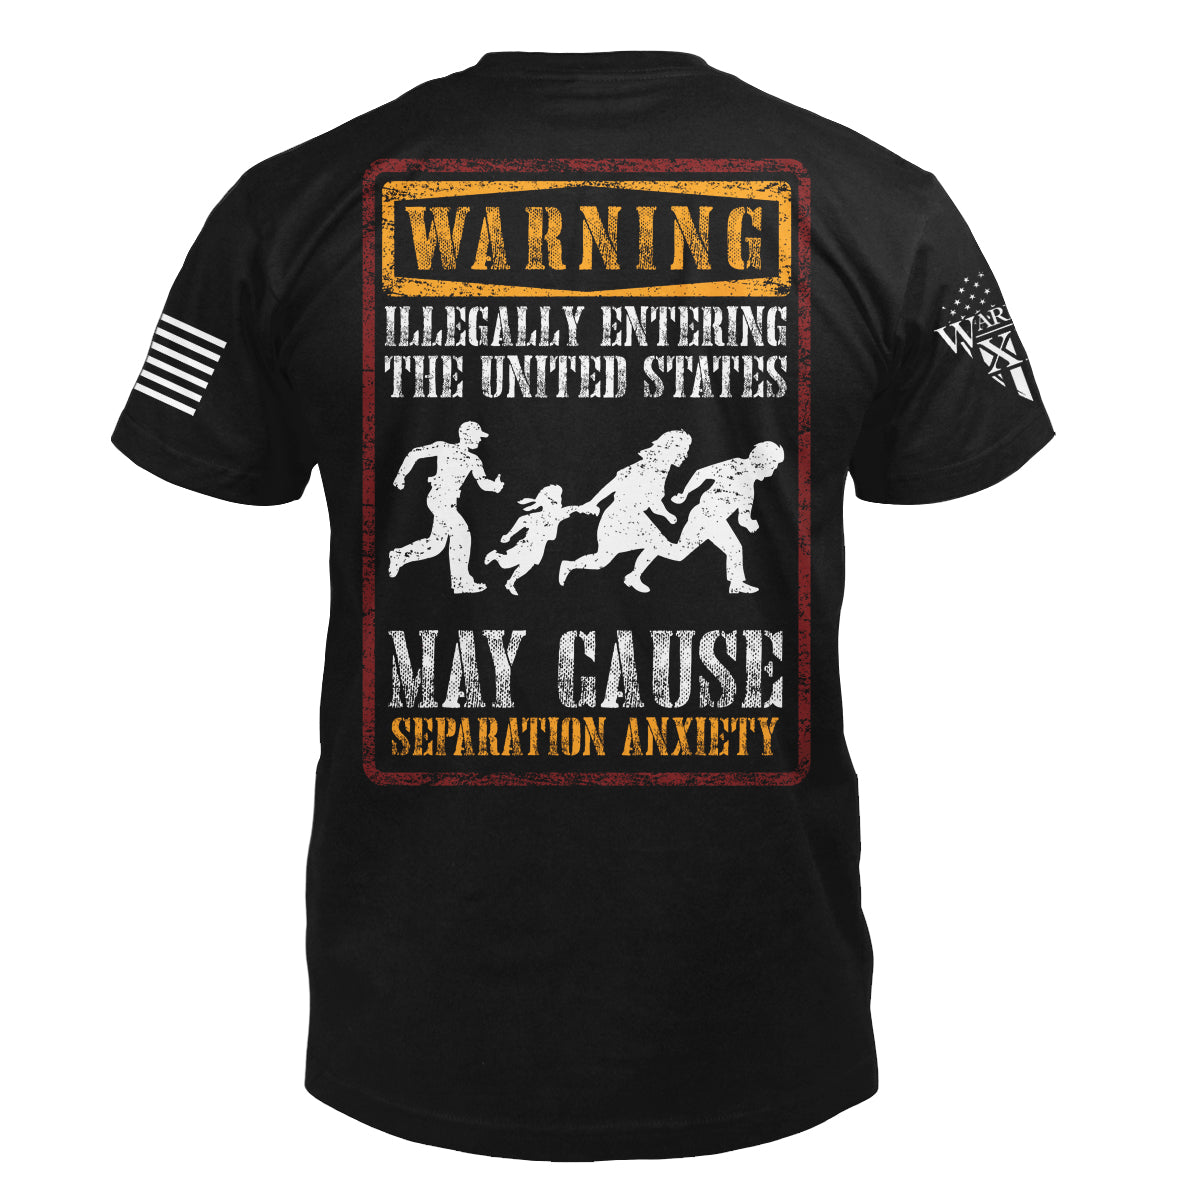 A navy blue t-shirt with the words "illegally entering the United states, may cause seprataion anxiety" with some white figured printed on the back of the shirt.